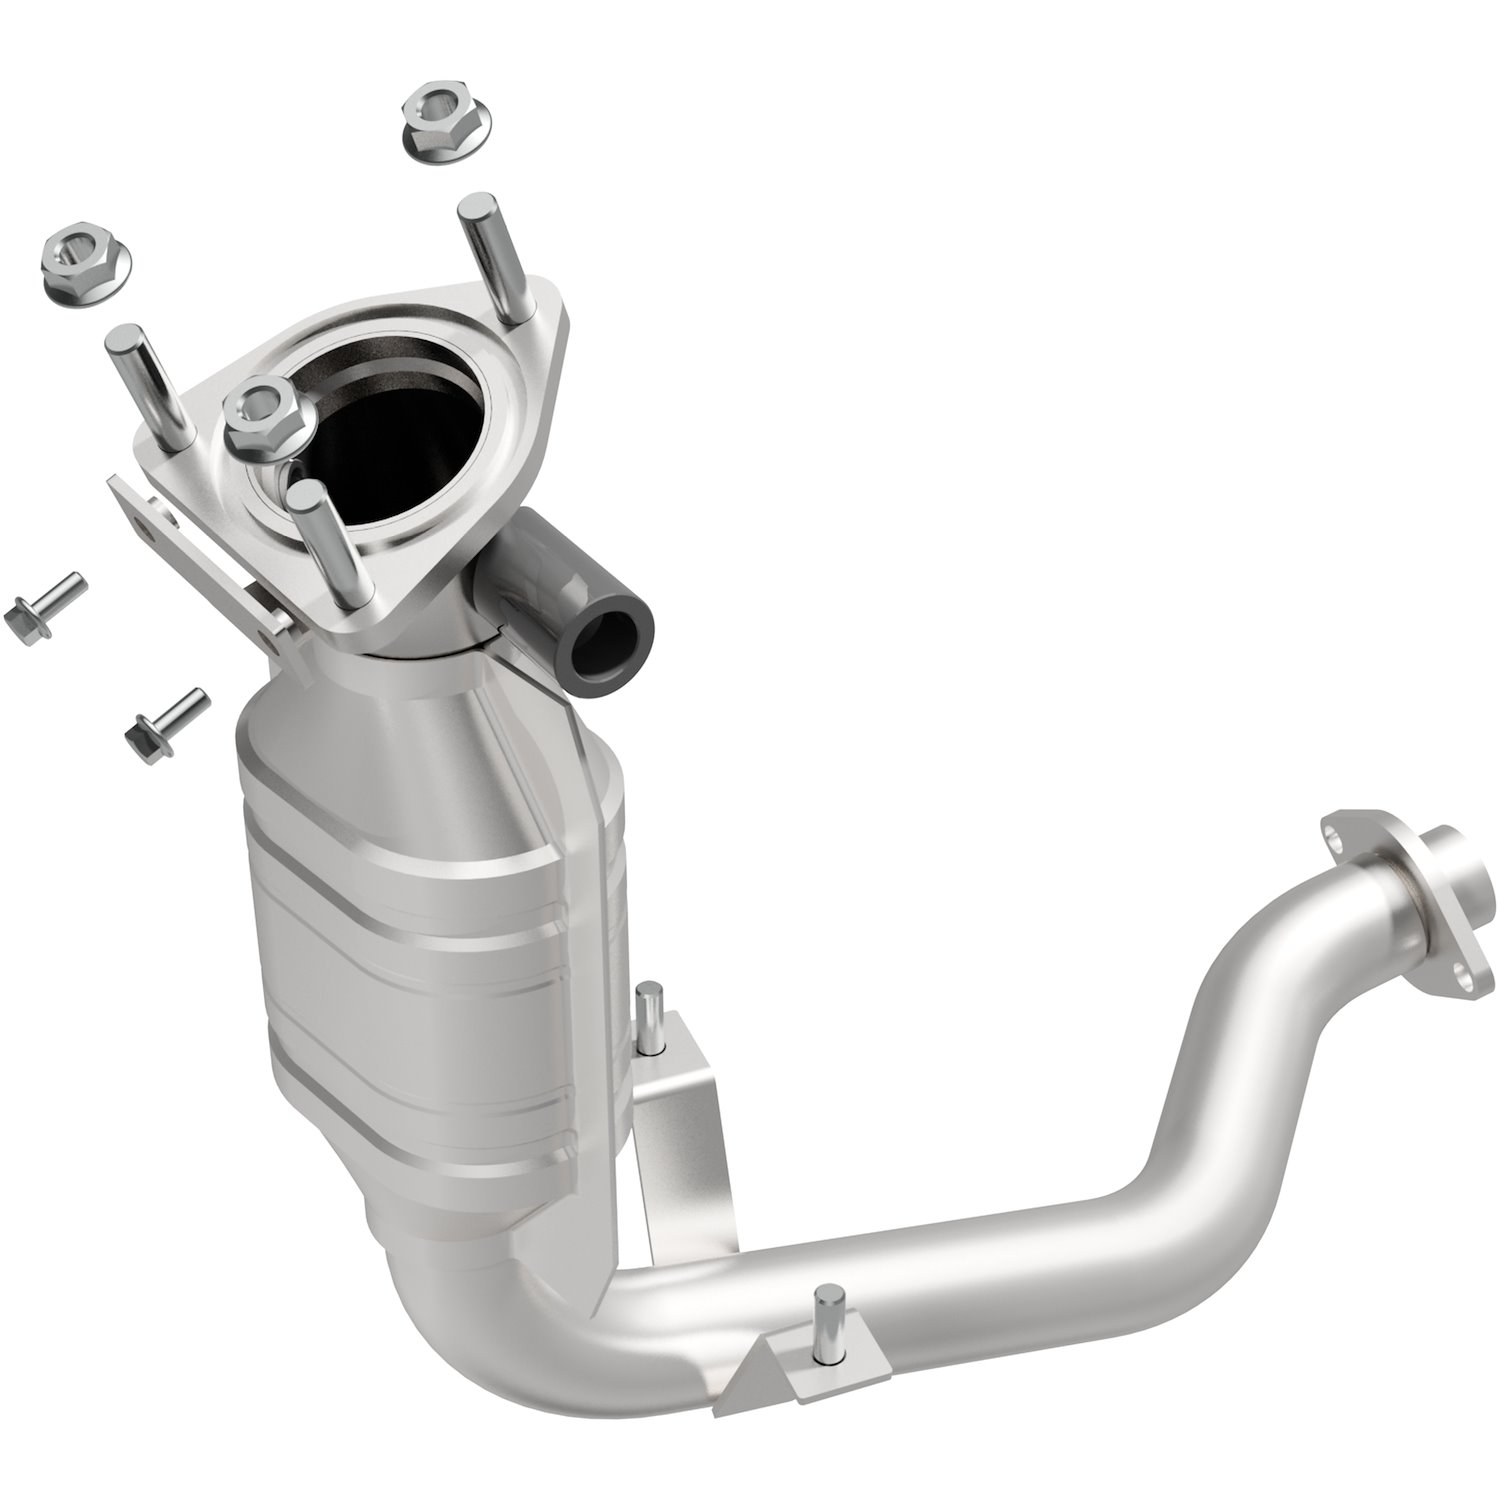 OEM Grade Federal / EPA Compliant Direct-Fit Catalytic Converter 49379